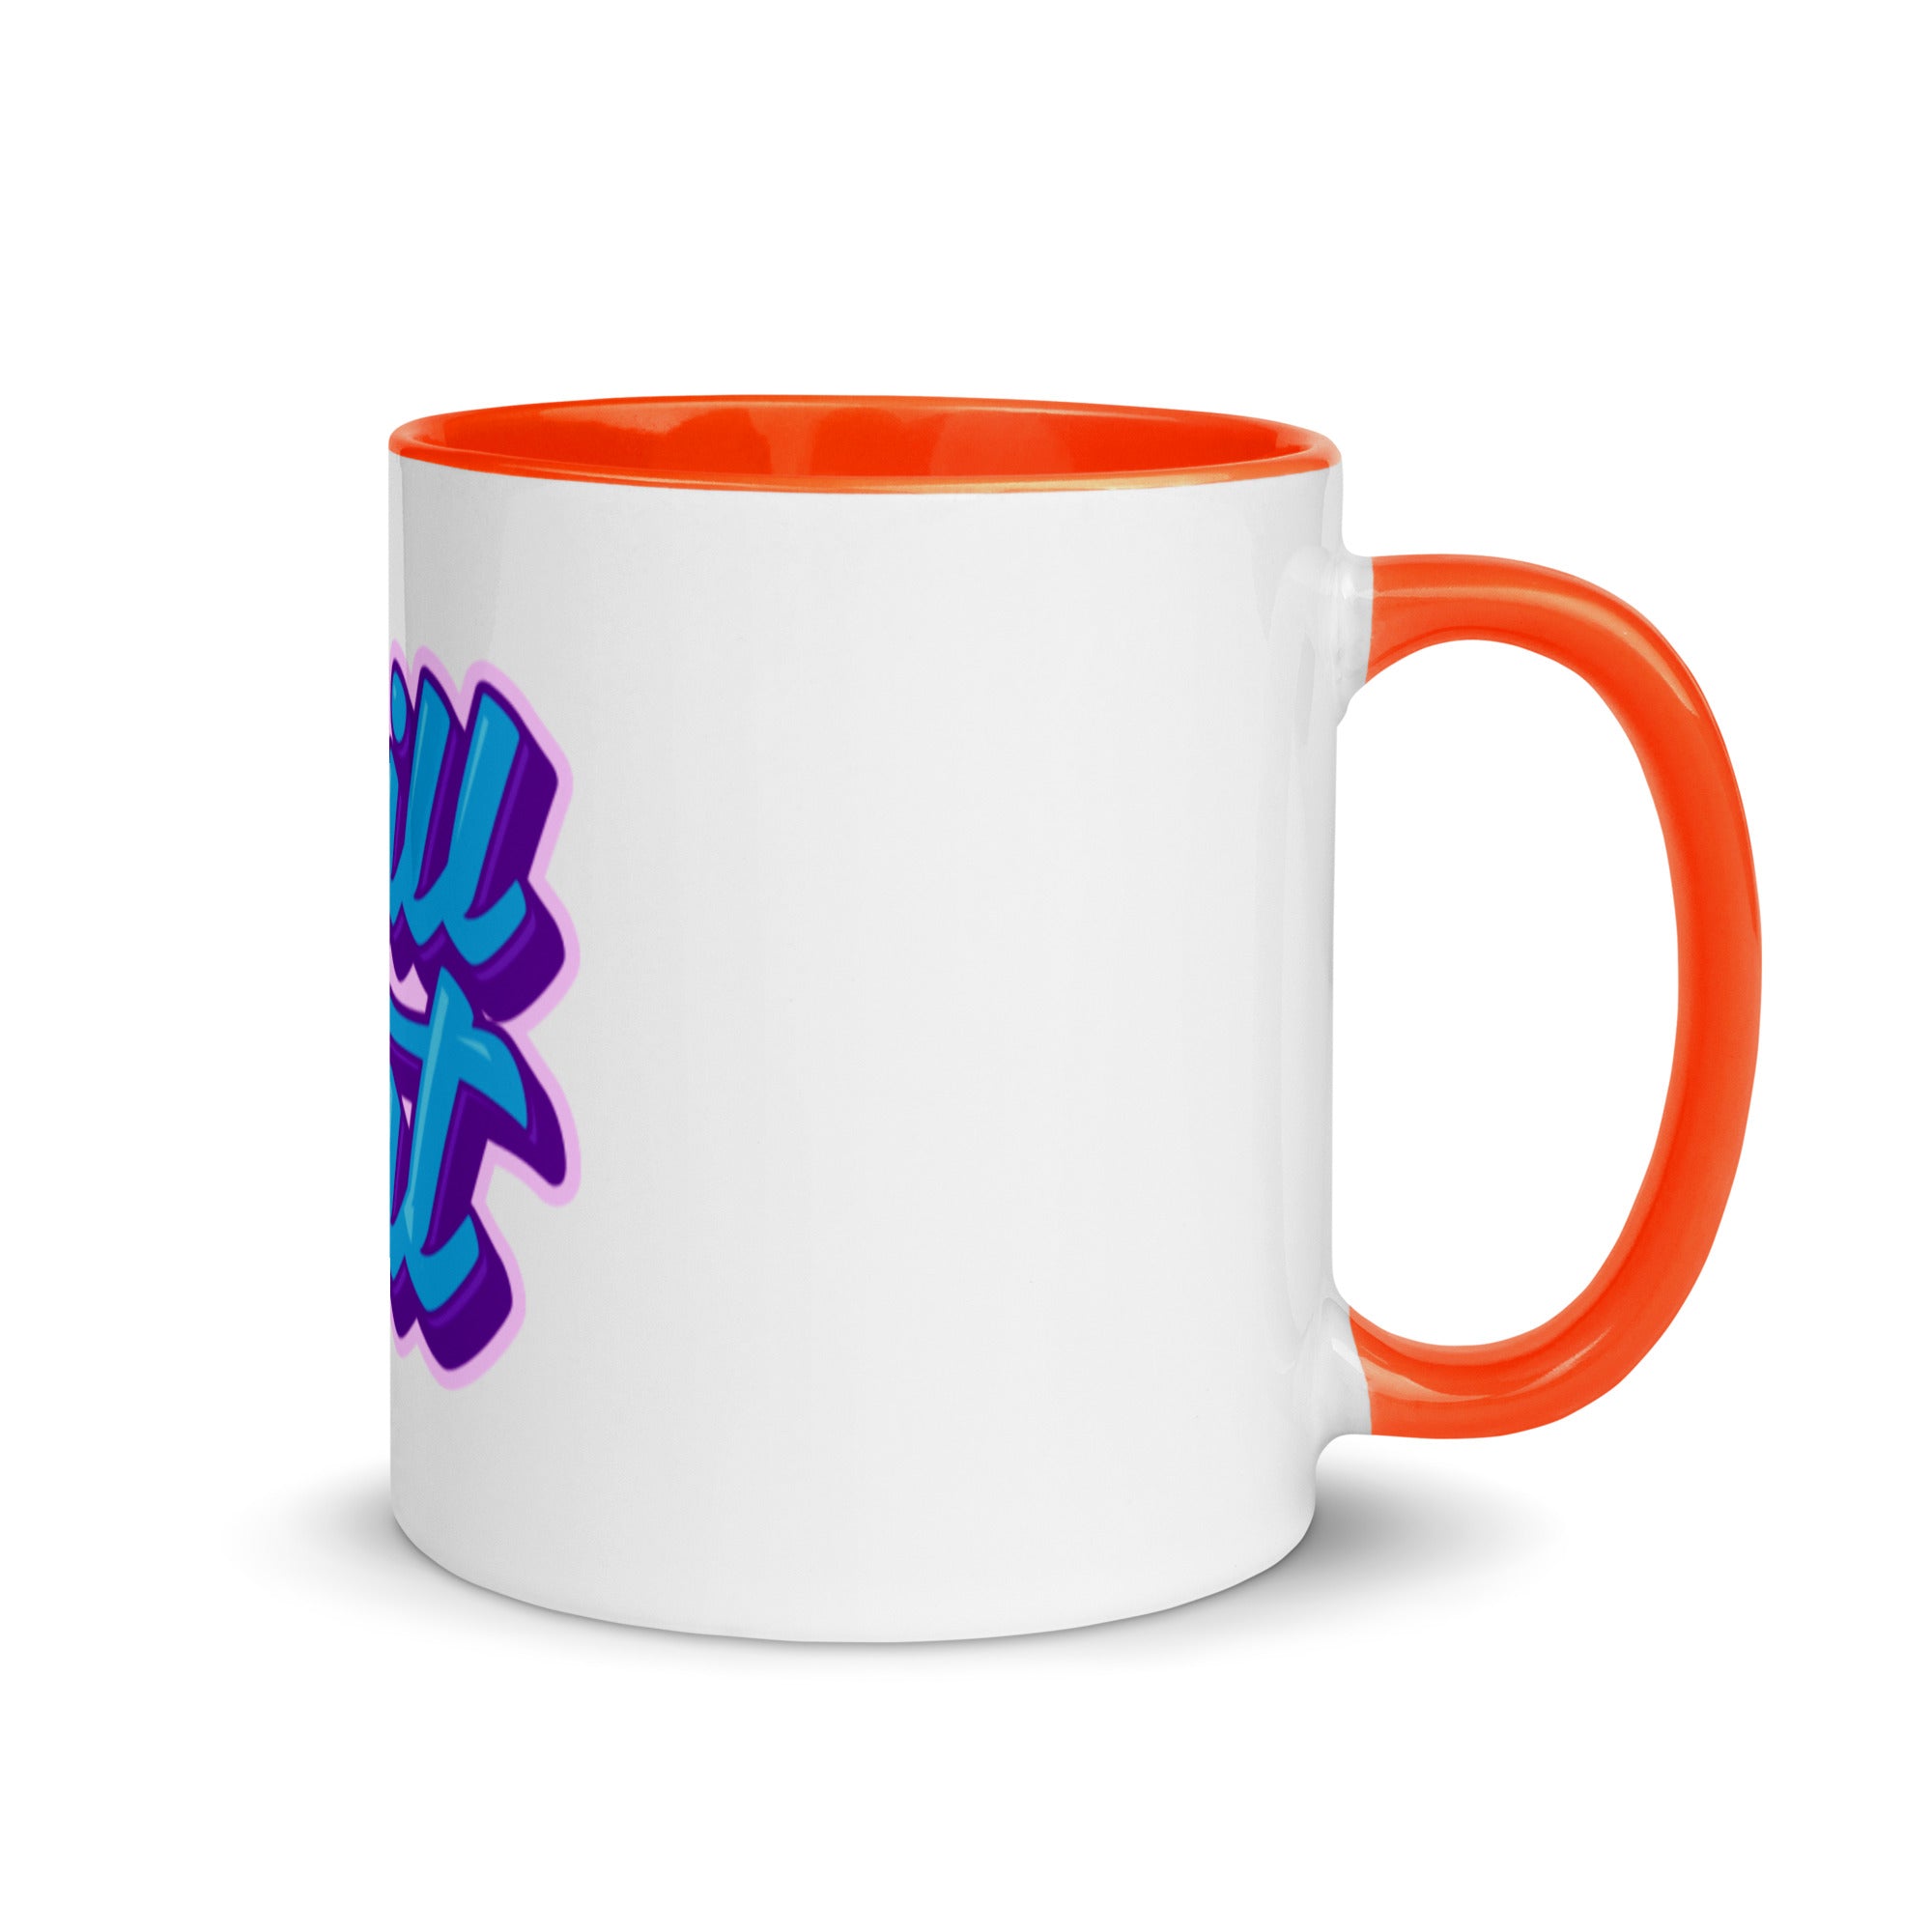 Chill Out - Mug with Color Inside